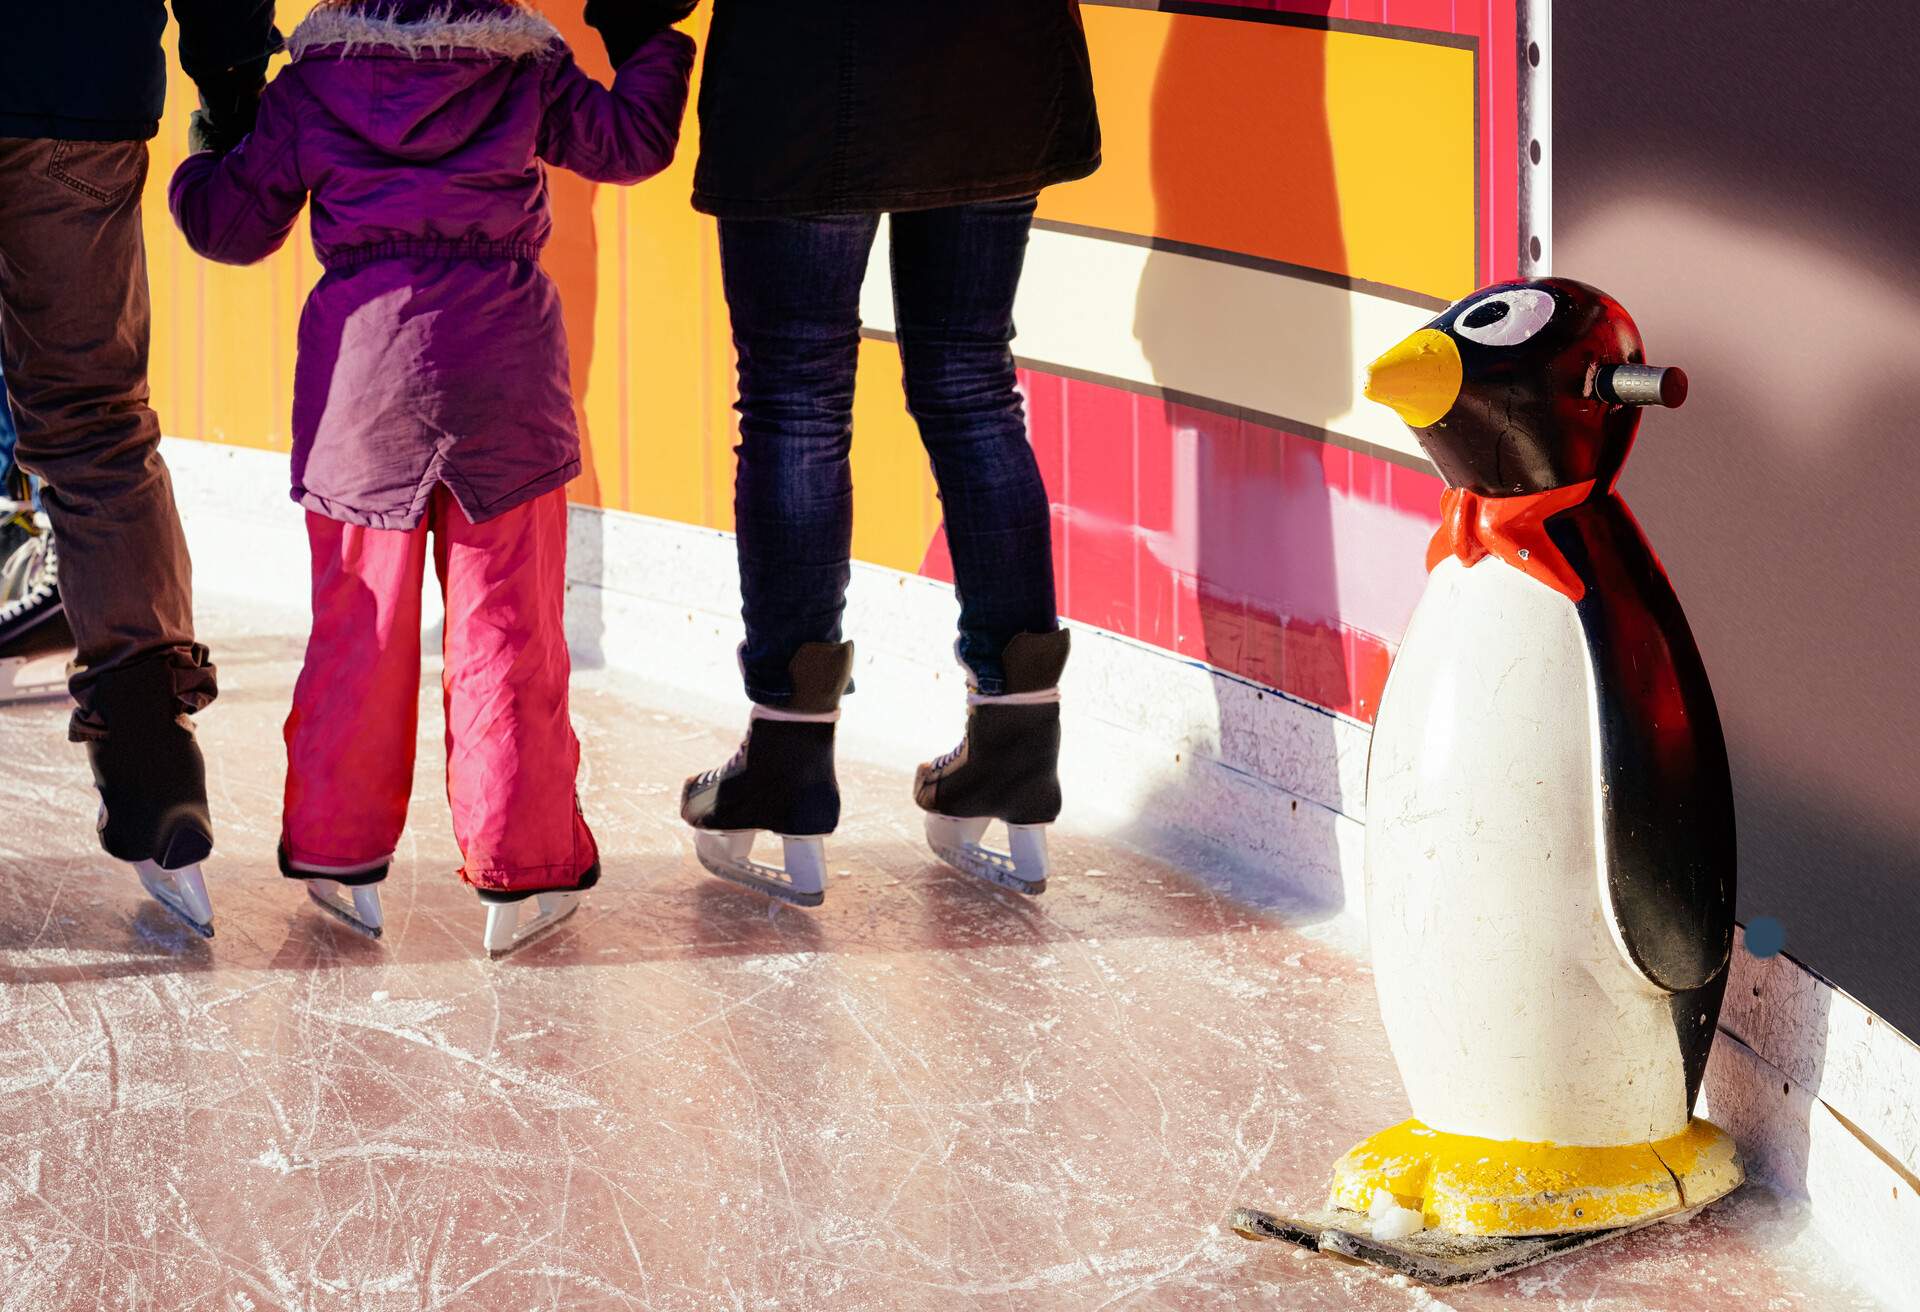 Penguin skate aids and assistant and family doing skating on the winter rink at Christmas market in Berlin in Germany in Europe in winter. Holiday day out with skates.